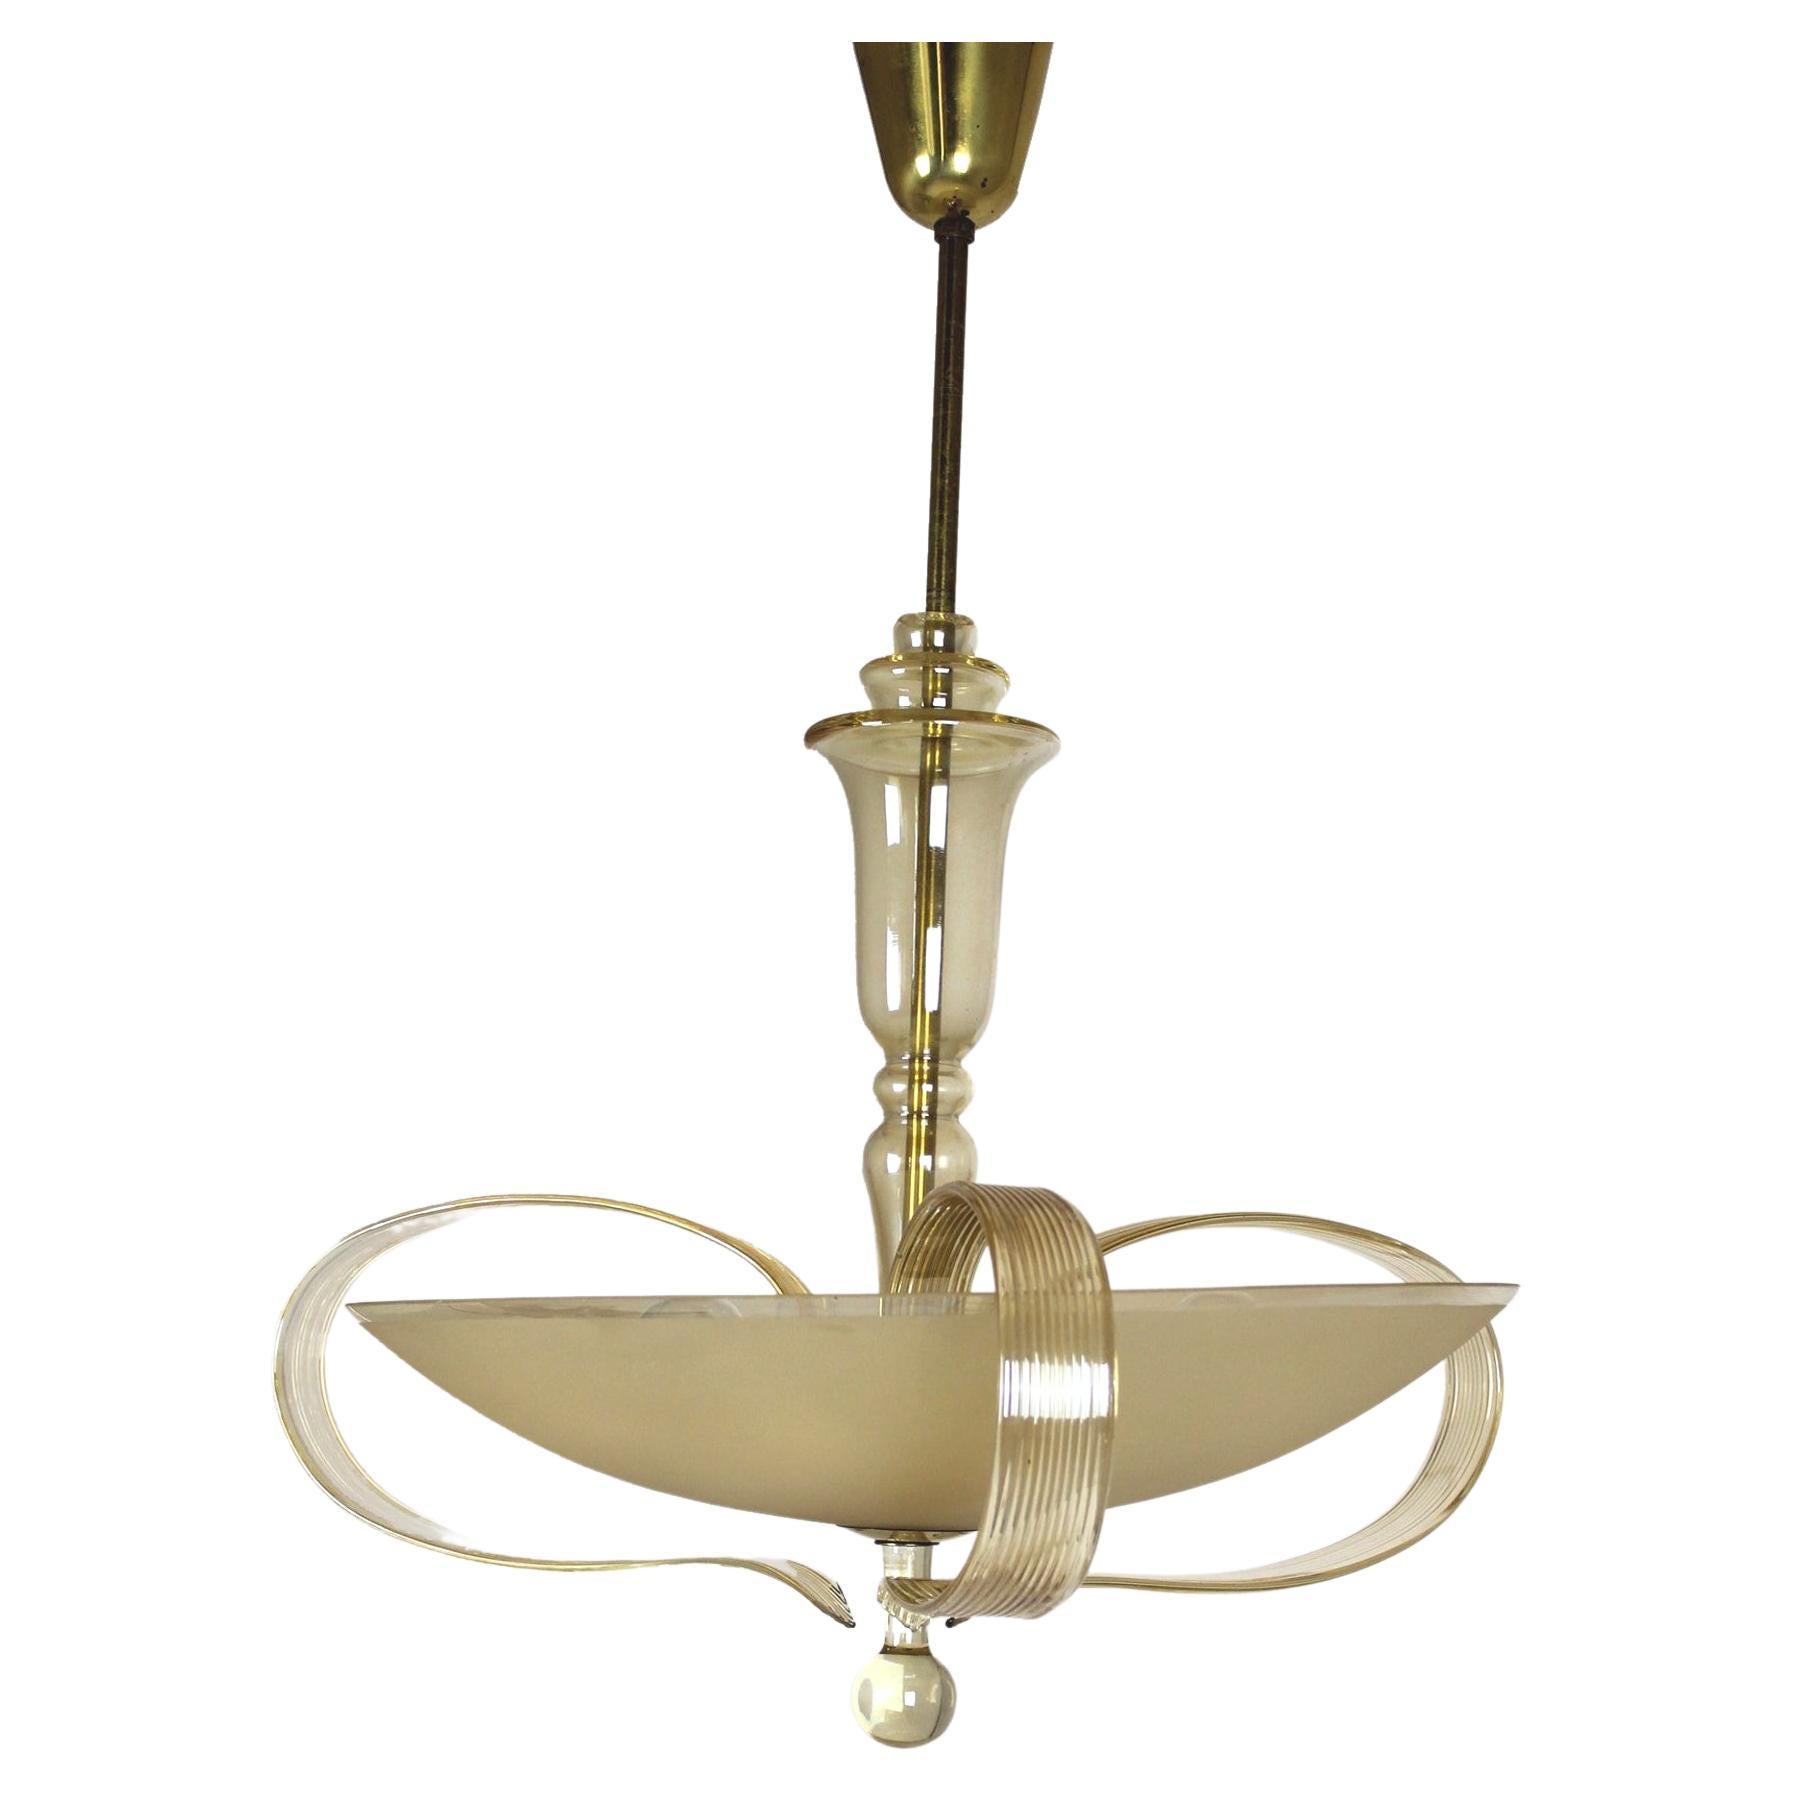 Brass and Curved Glass Chandelier from ESC Zukov, 1940s For Sale